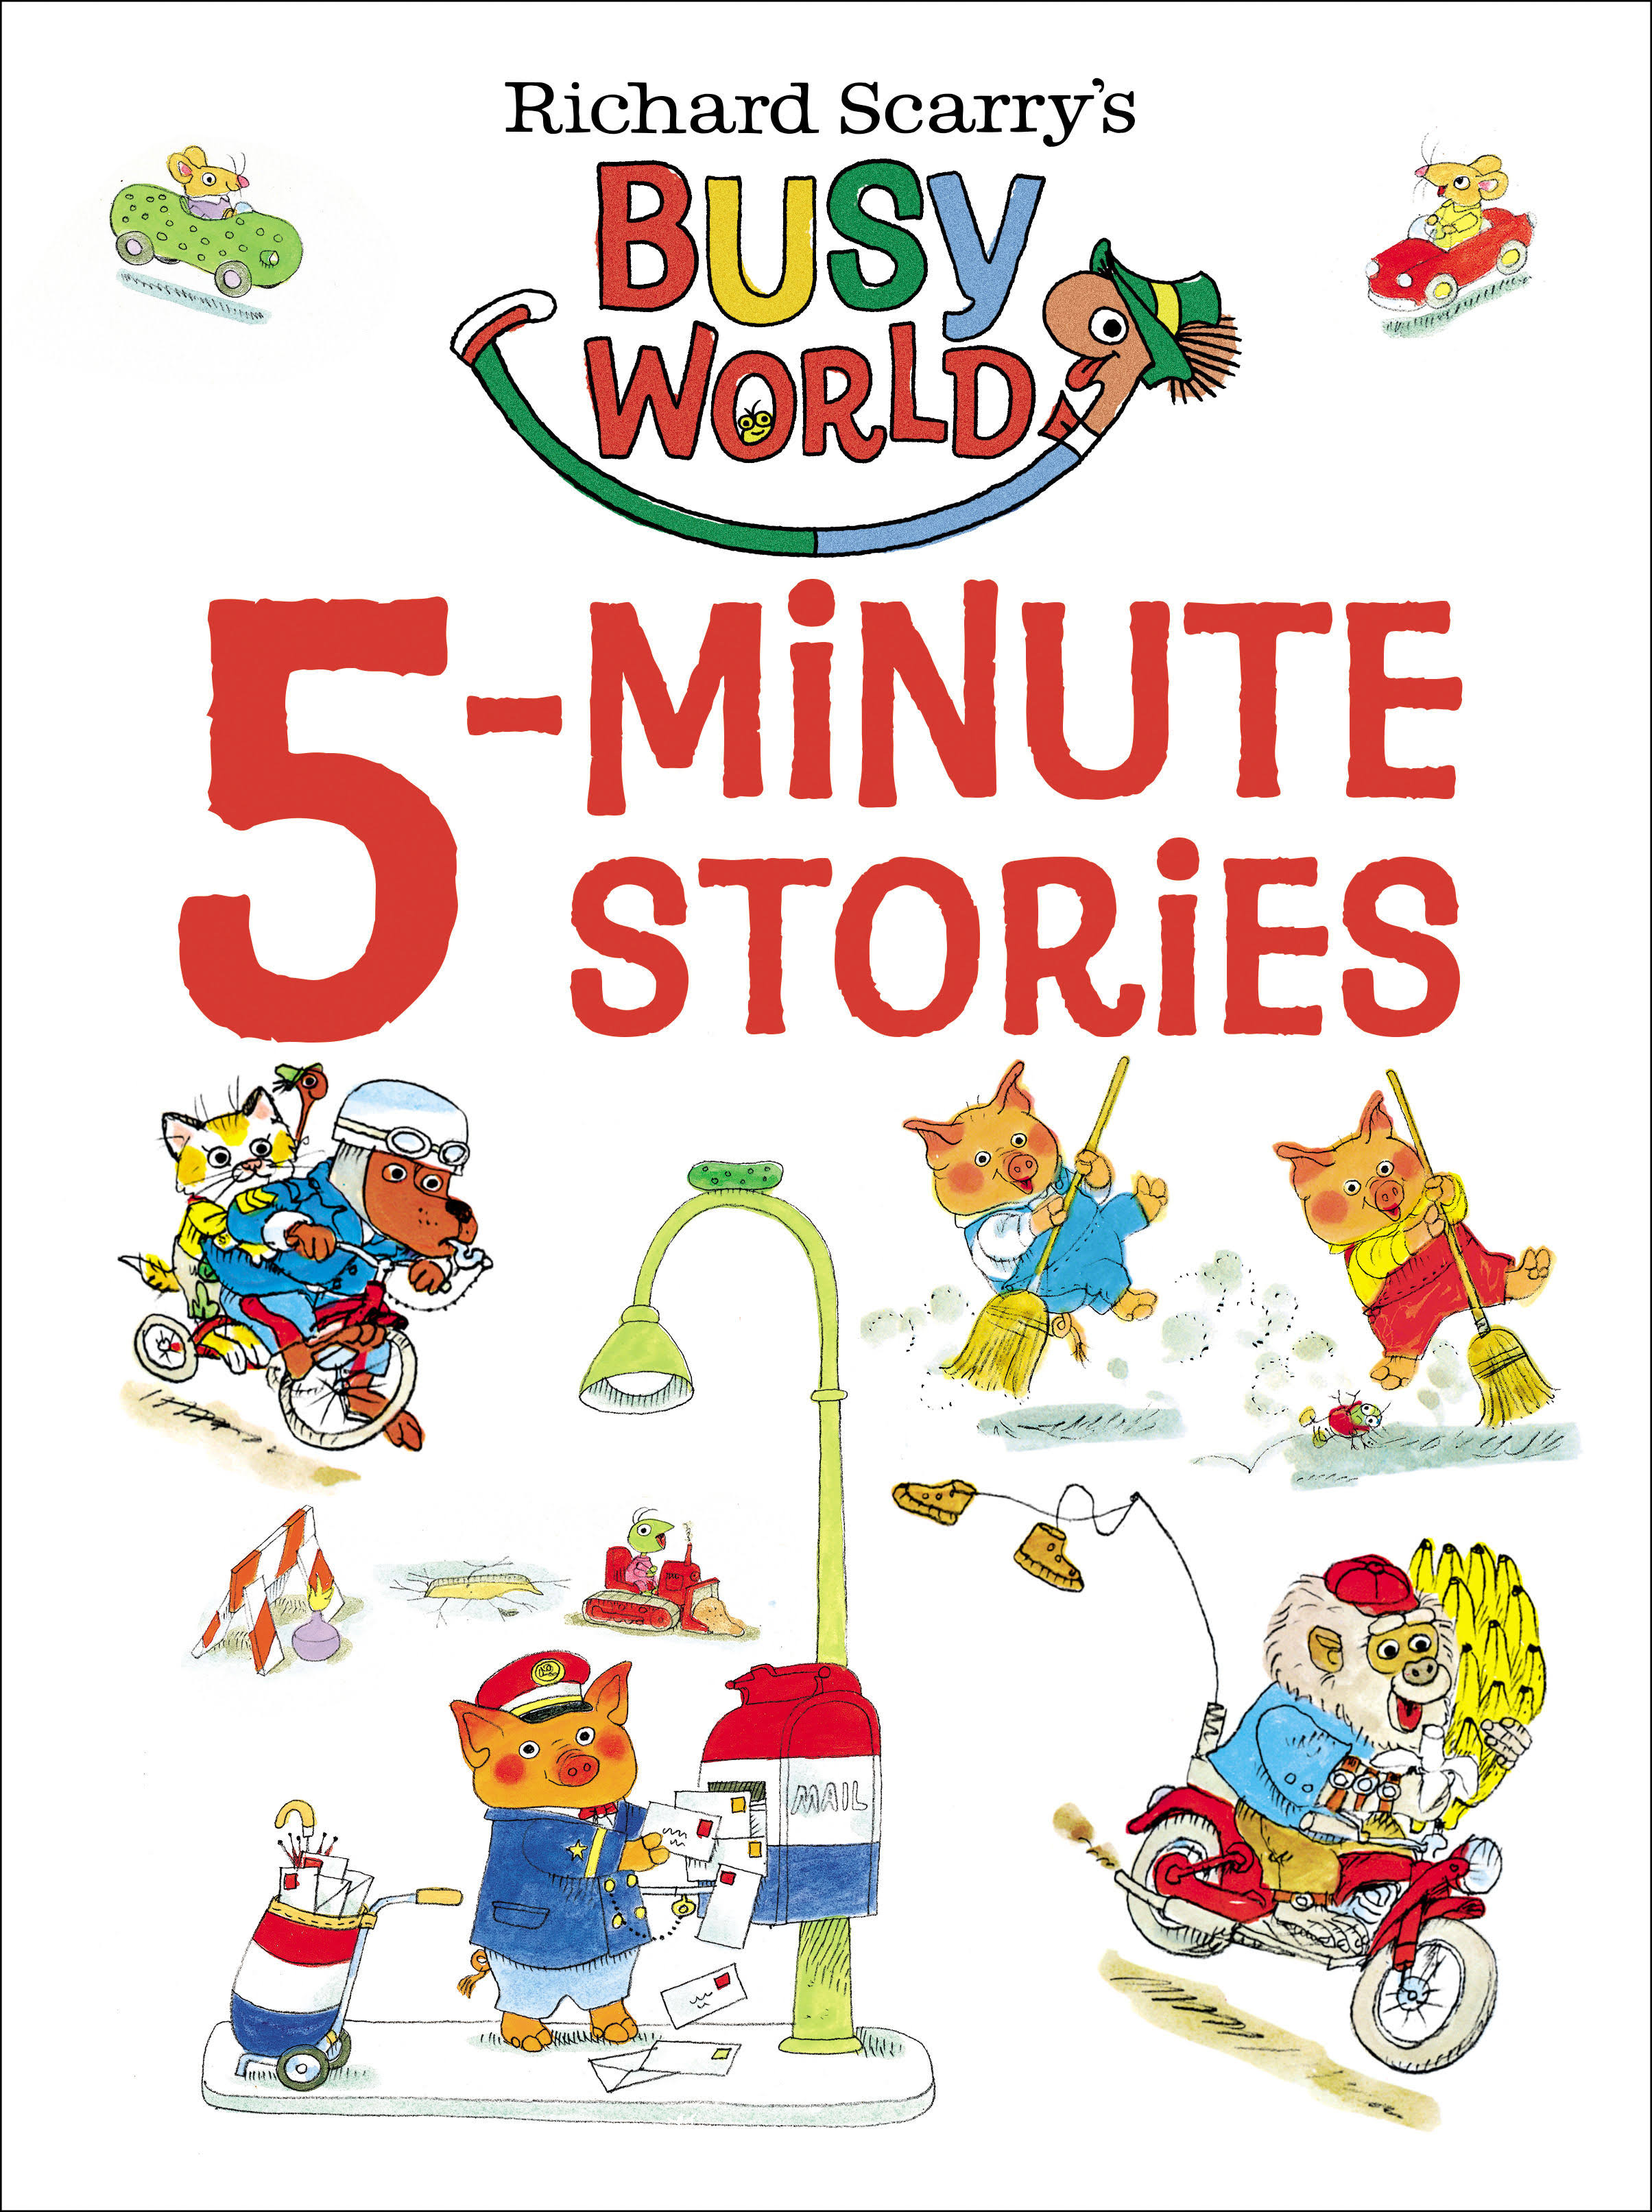 Richard Scarry's 5-Minute Stories [Book]